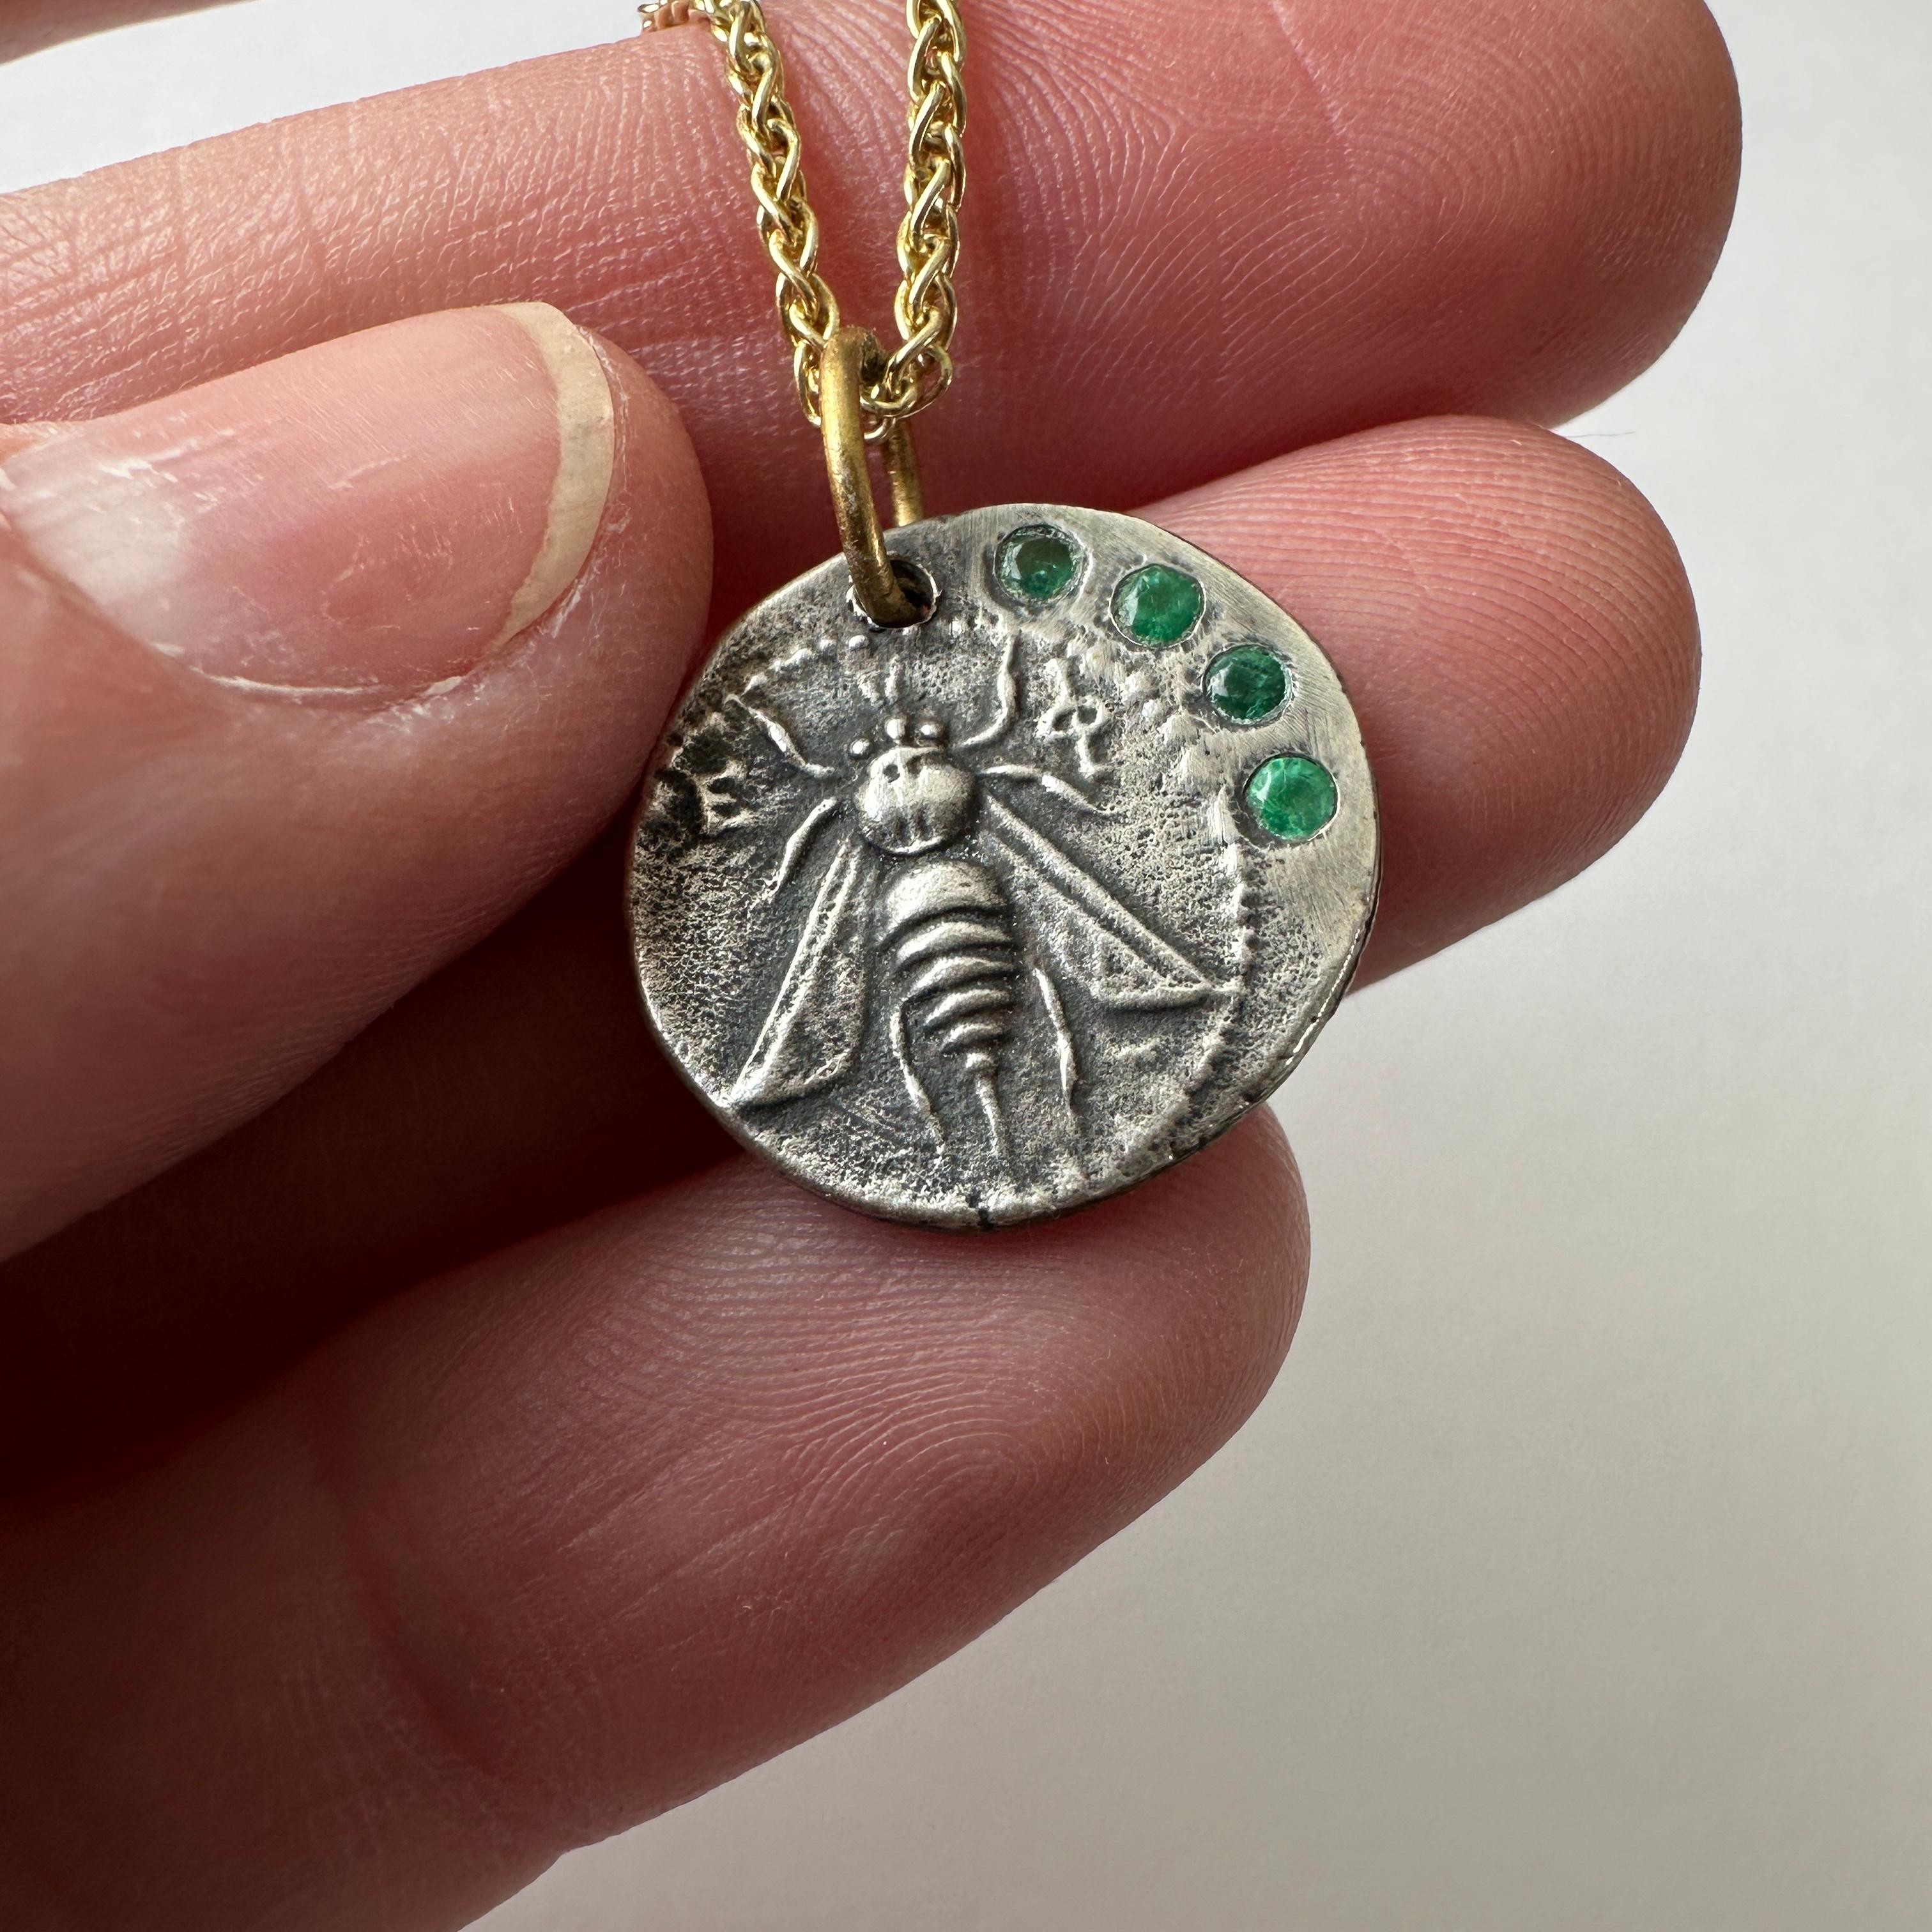 Ephesus, Queen Bee, Tetra Drachm, Ancient Charm Coin (Replica) Pendant, 24kt Gol In New Condition For Sale In Bozeman, MT